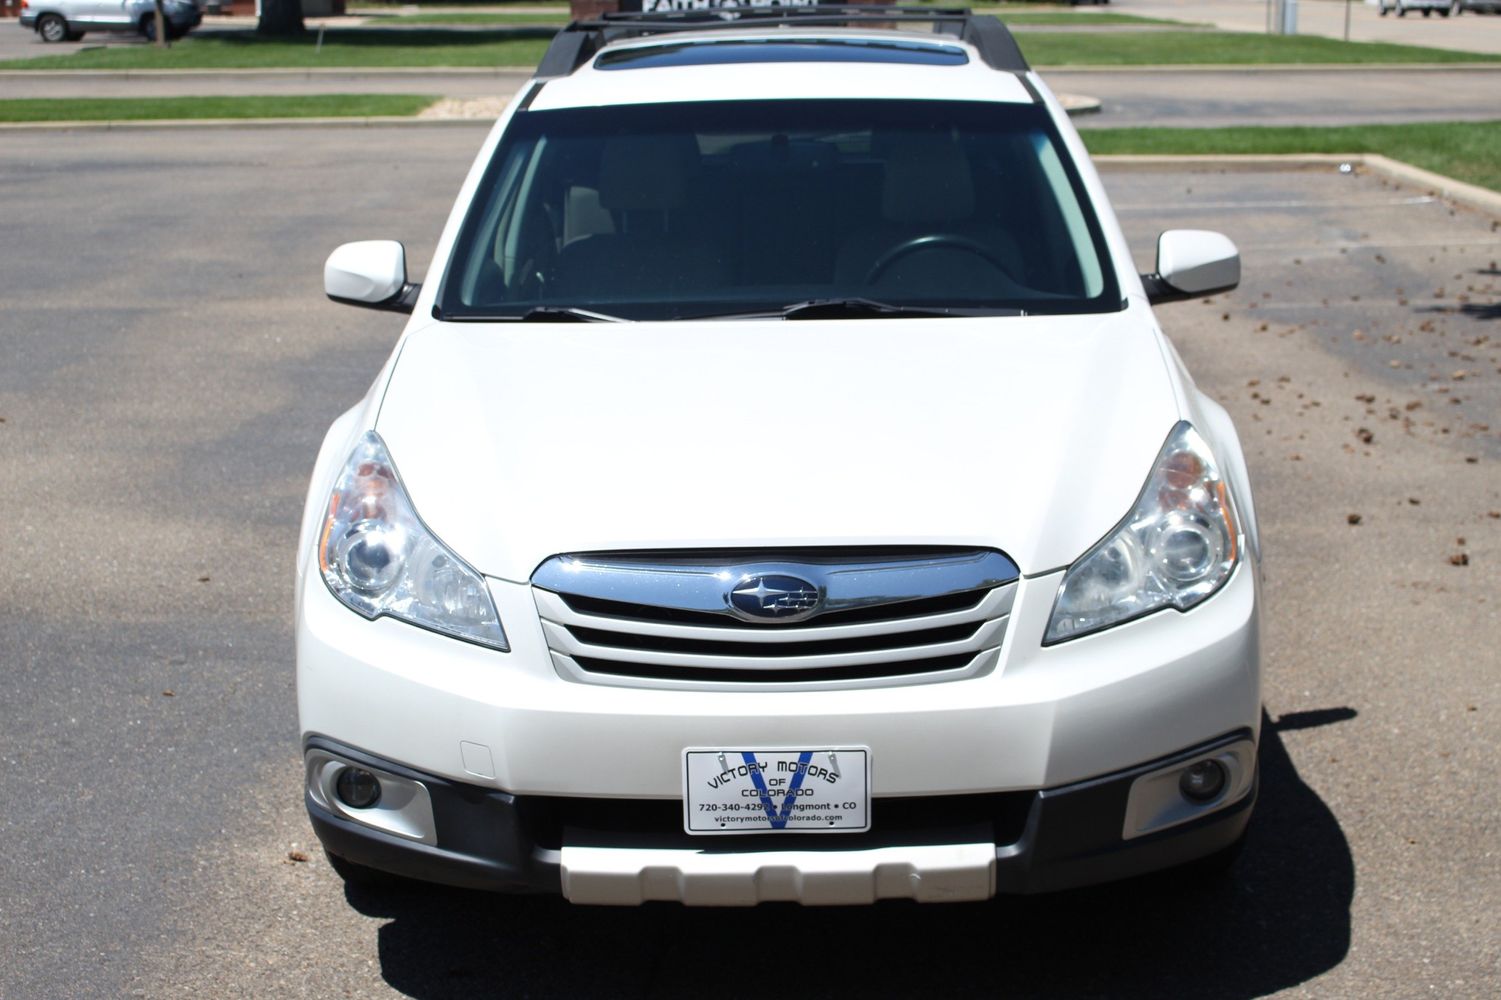 2011 Subaru Outback 3.6R Limited | Victory Motors of Colorado 2011 Subaru Outback 3.6 R Limited Towing Capacity